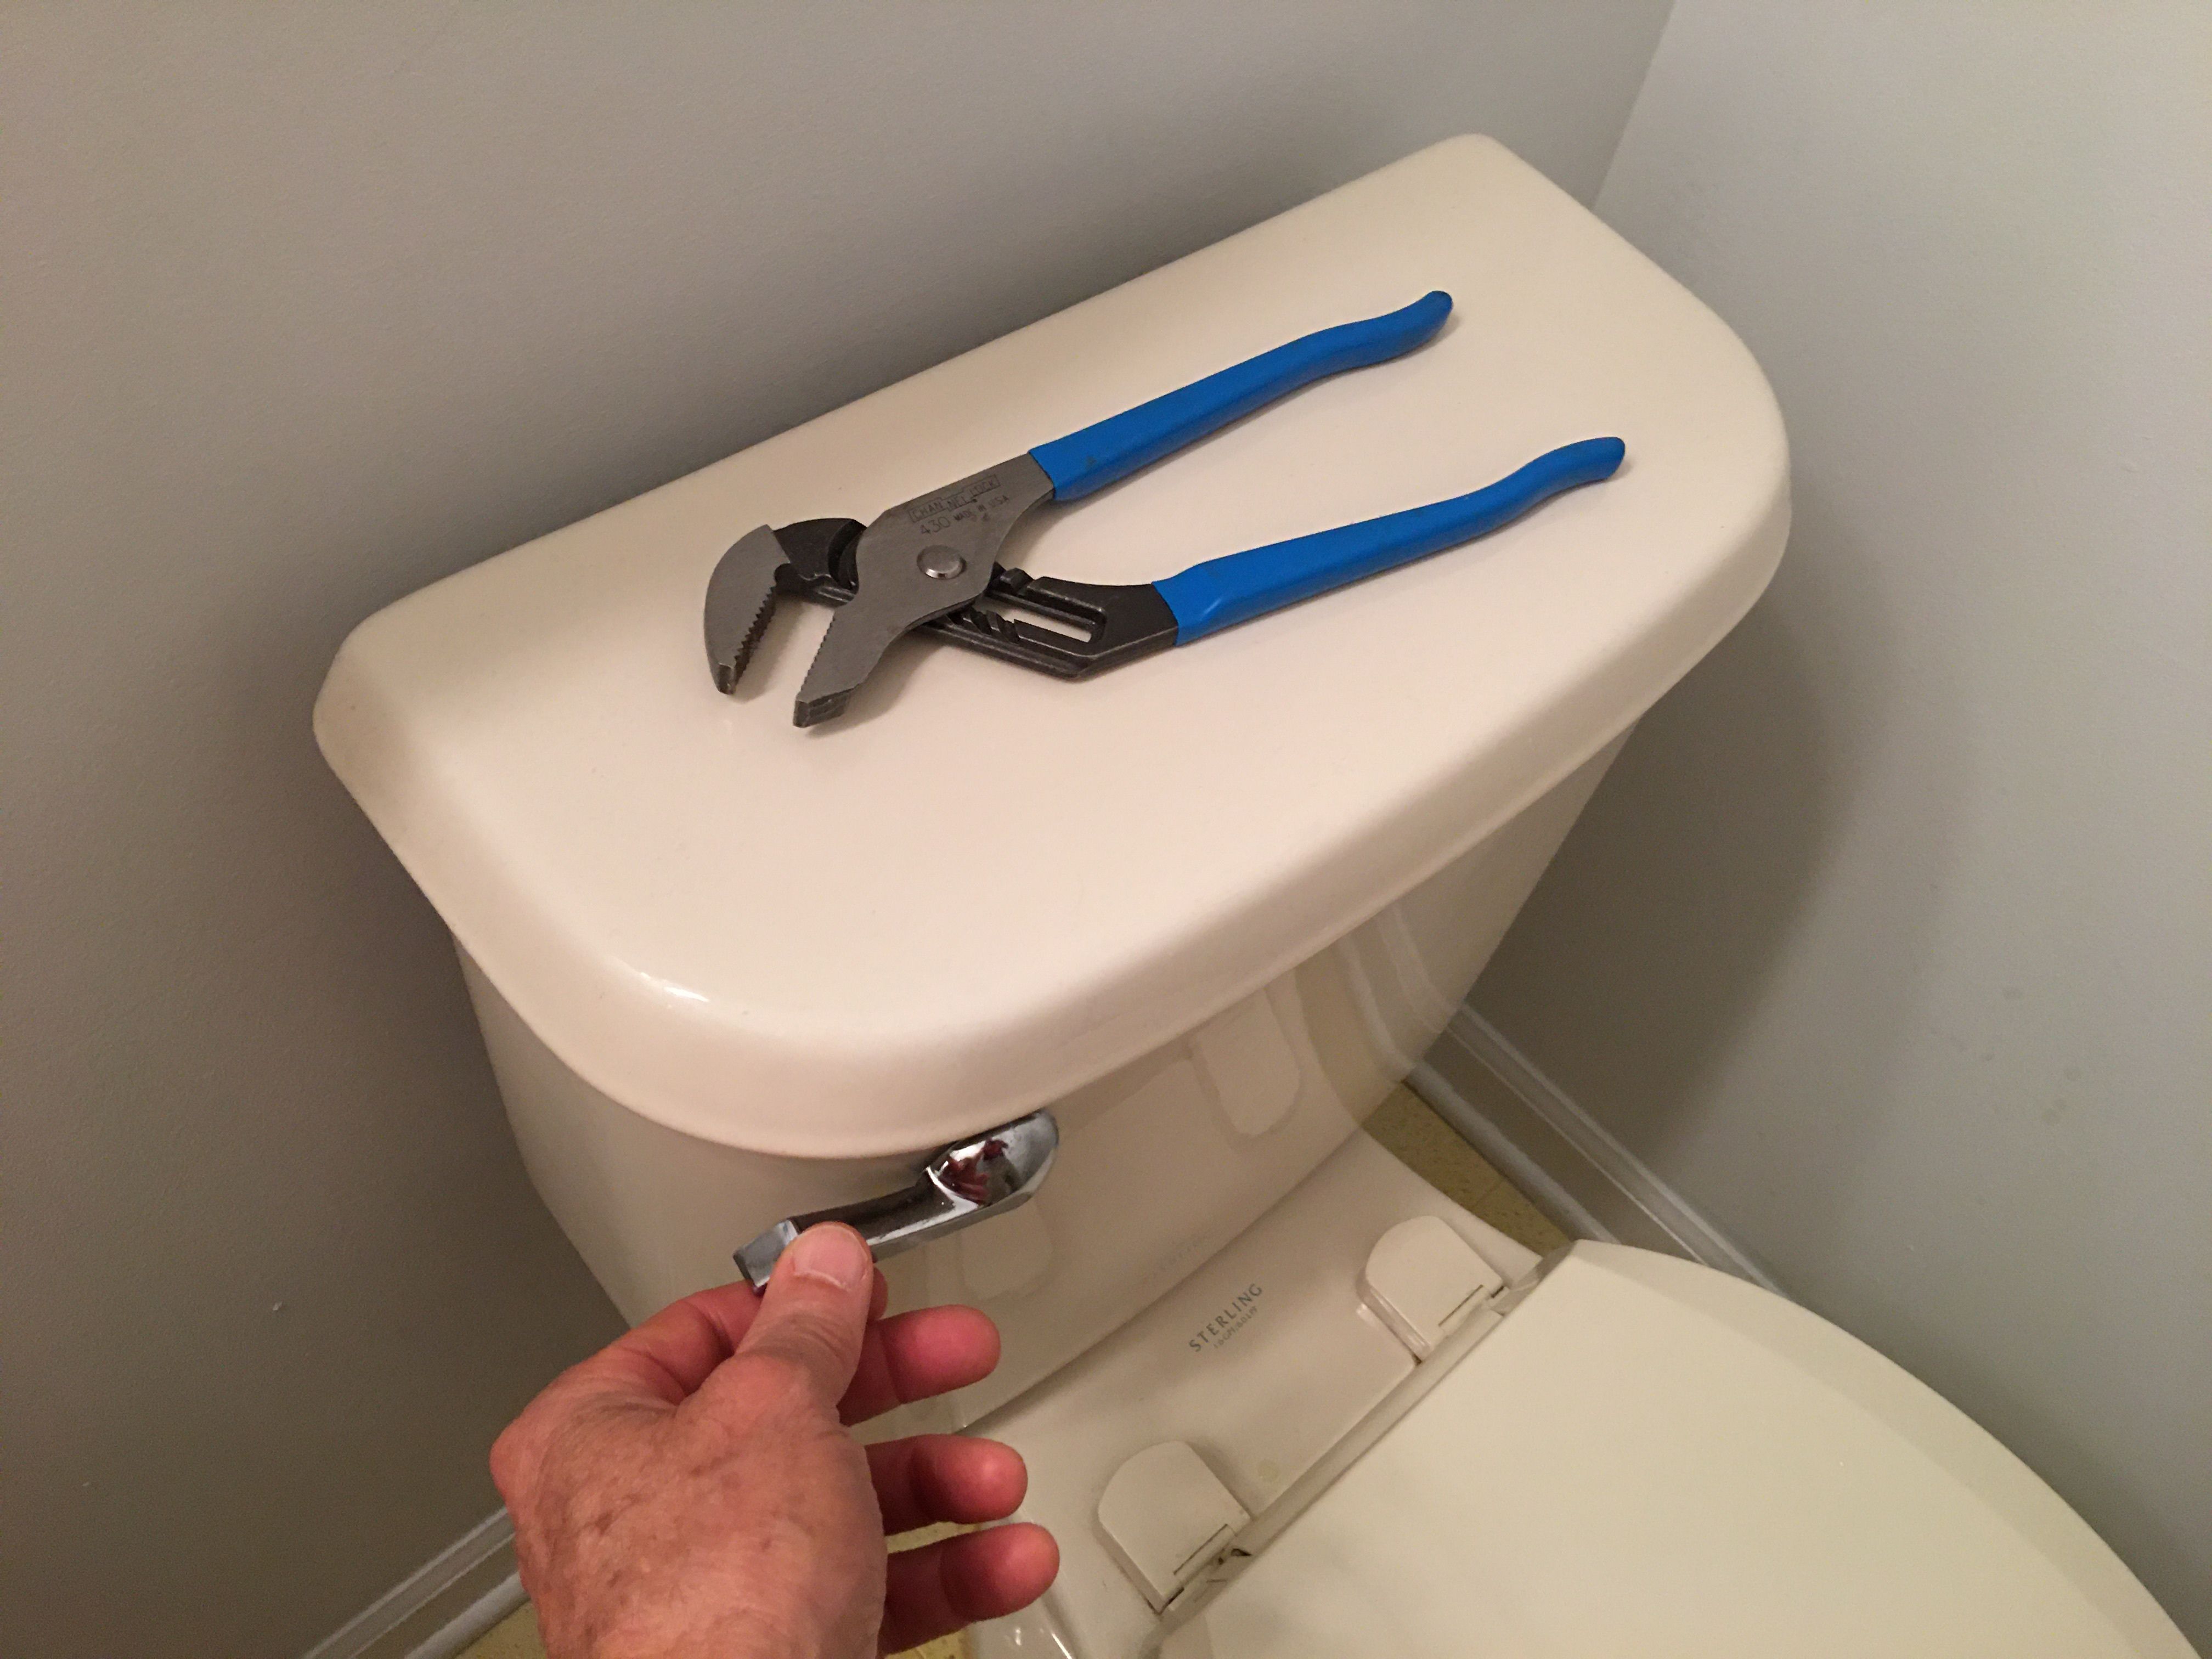 II. Tools and Materials Required for Removing a Toilet Tank